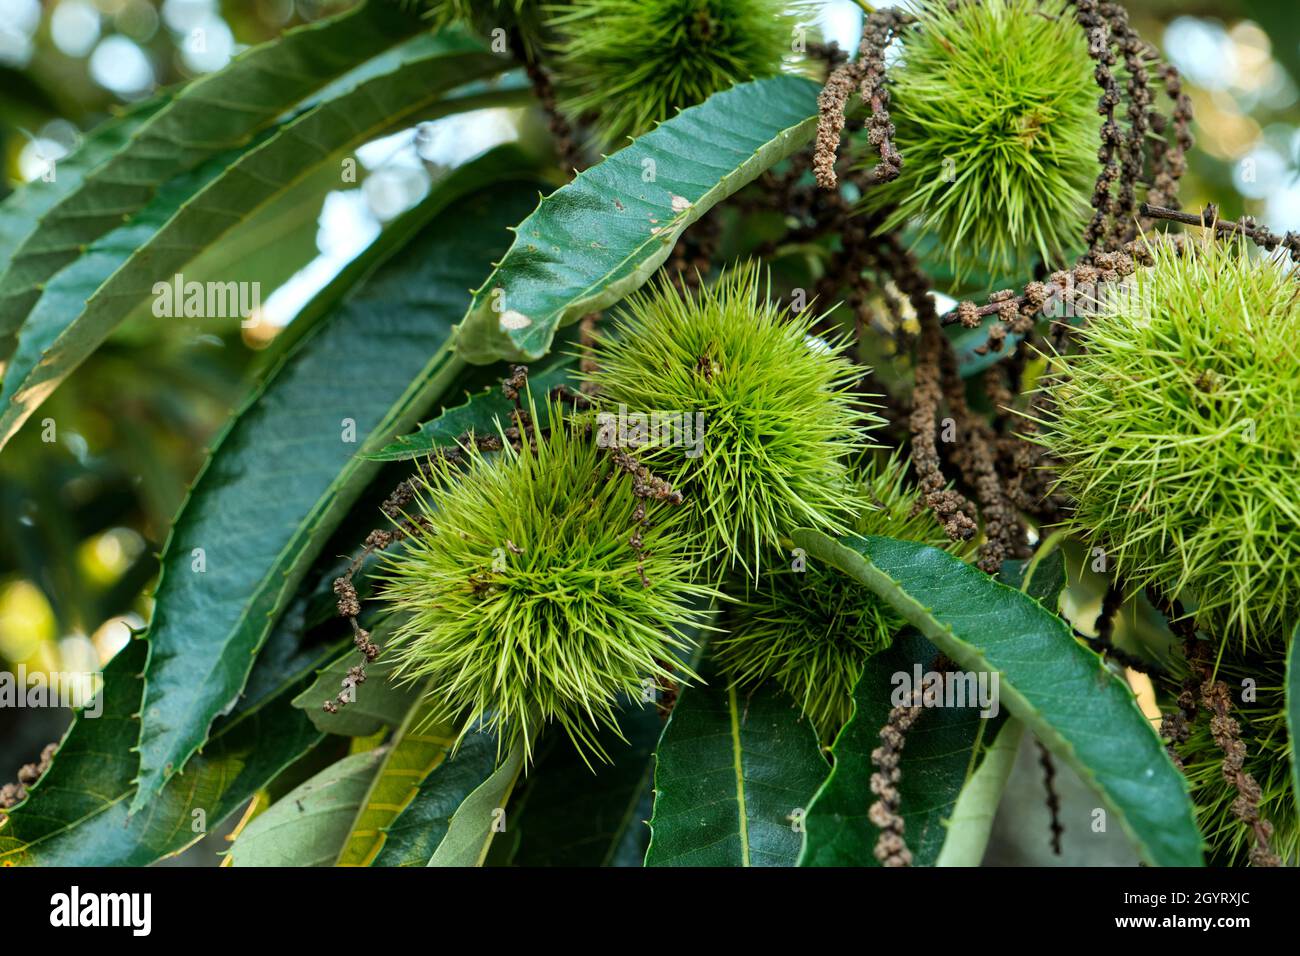 Castanea Sativa Sweet chestnut tree green sharp spiny cupules seed capsules Stock Photo